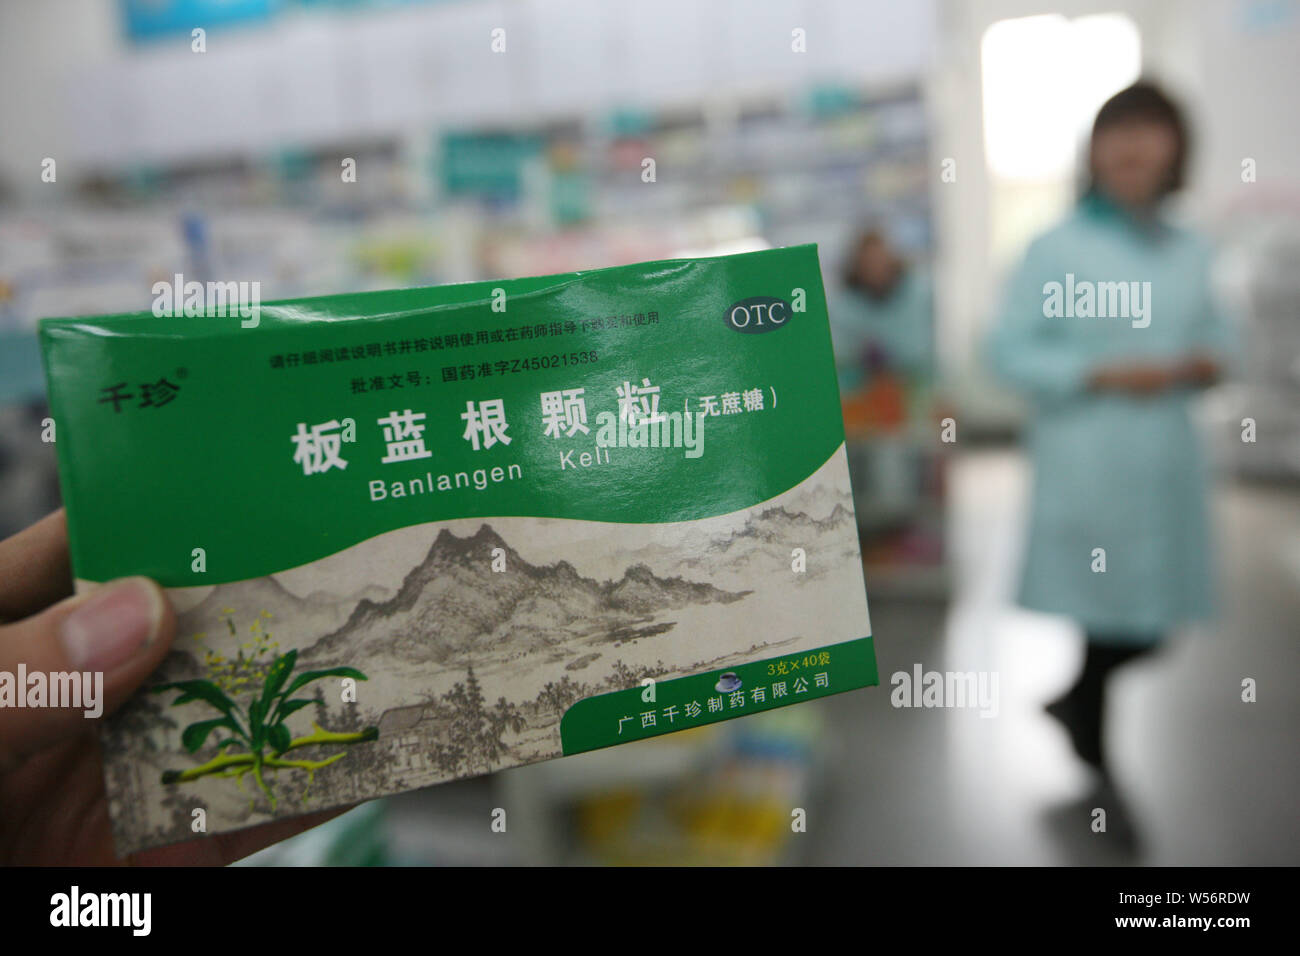 --FILE--A chemist shows a box of isatis indigotica root or 'banlangen,' a traditional Chinese medicinal herb used for the prevention and treatment of Stock Photo